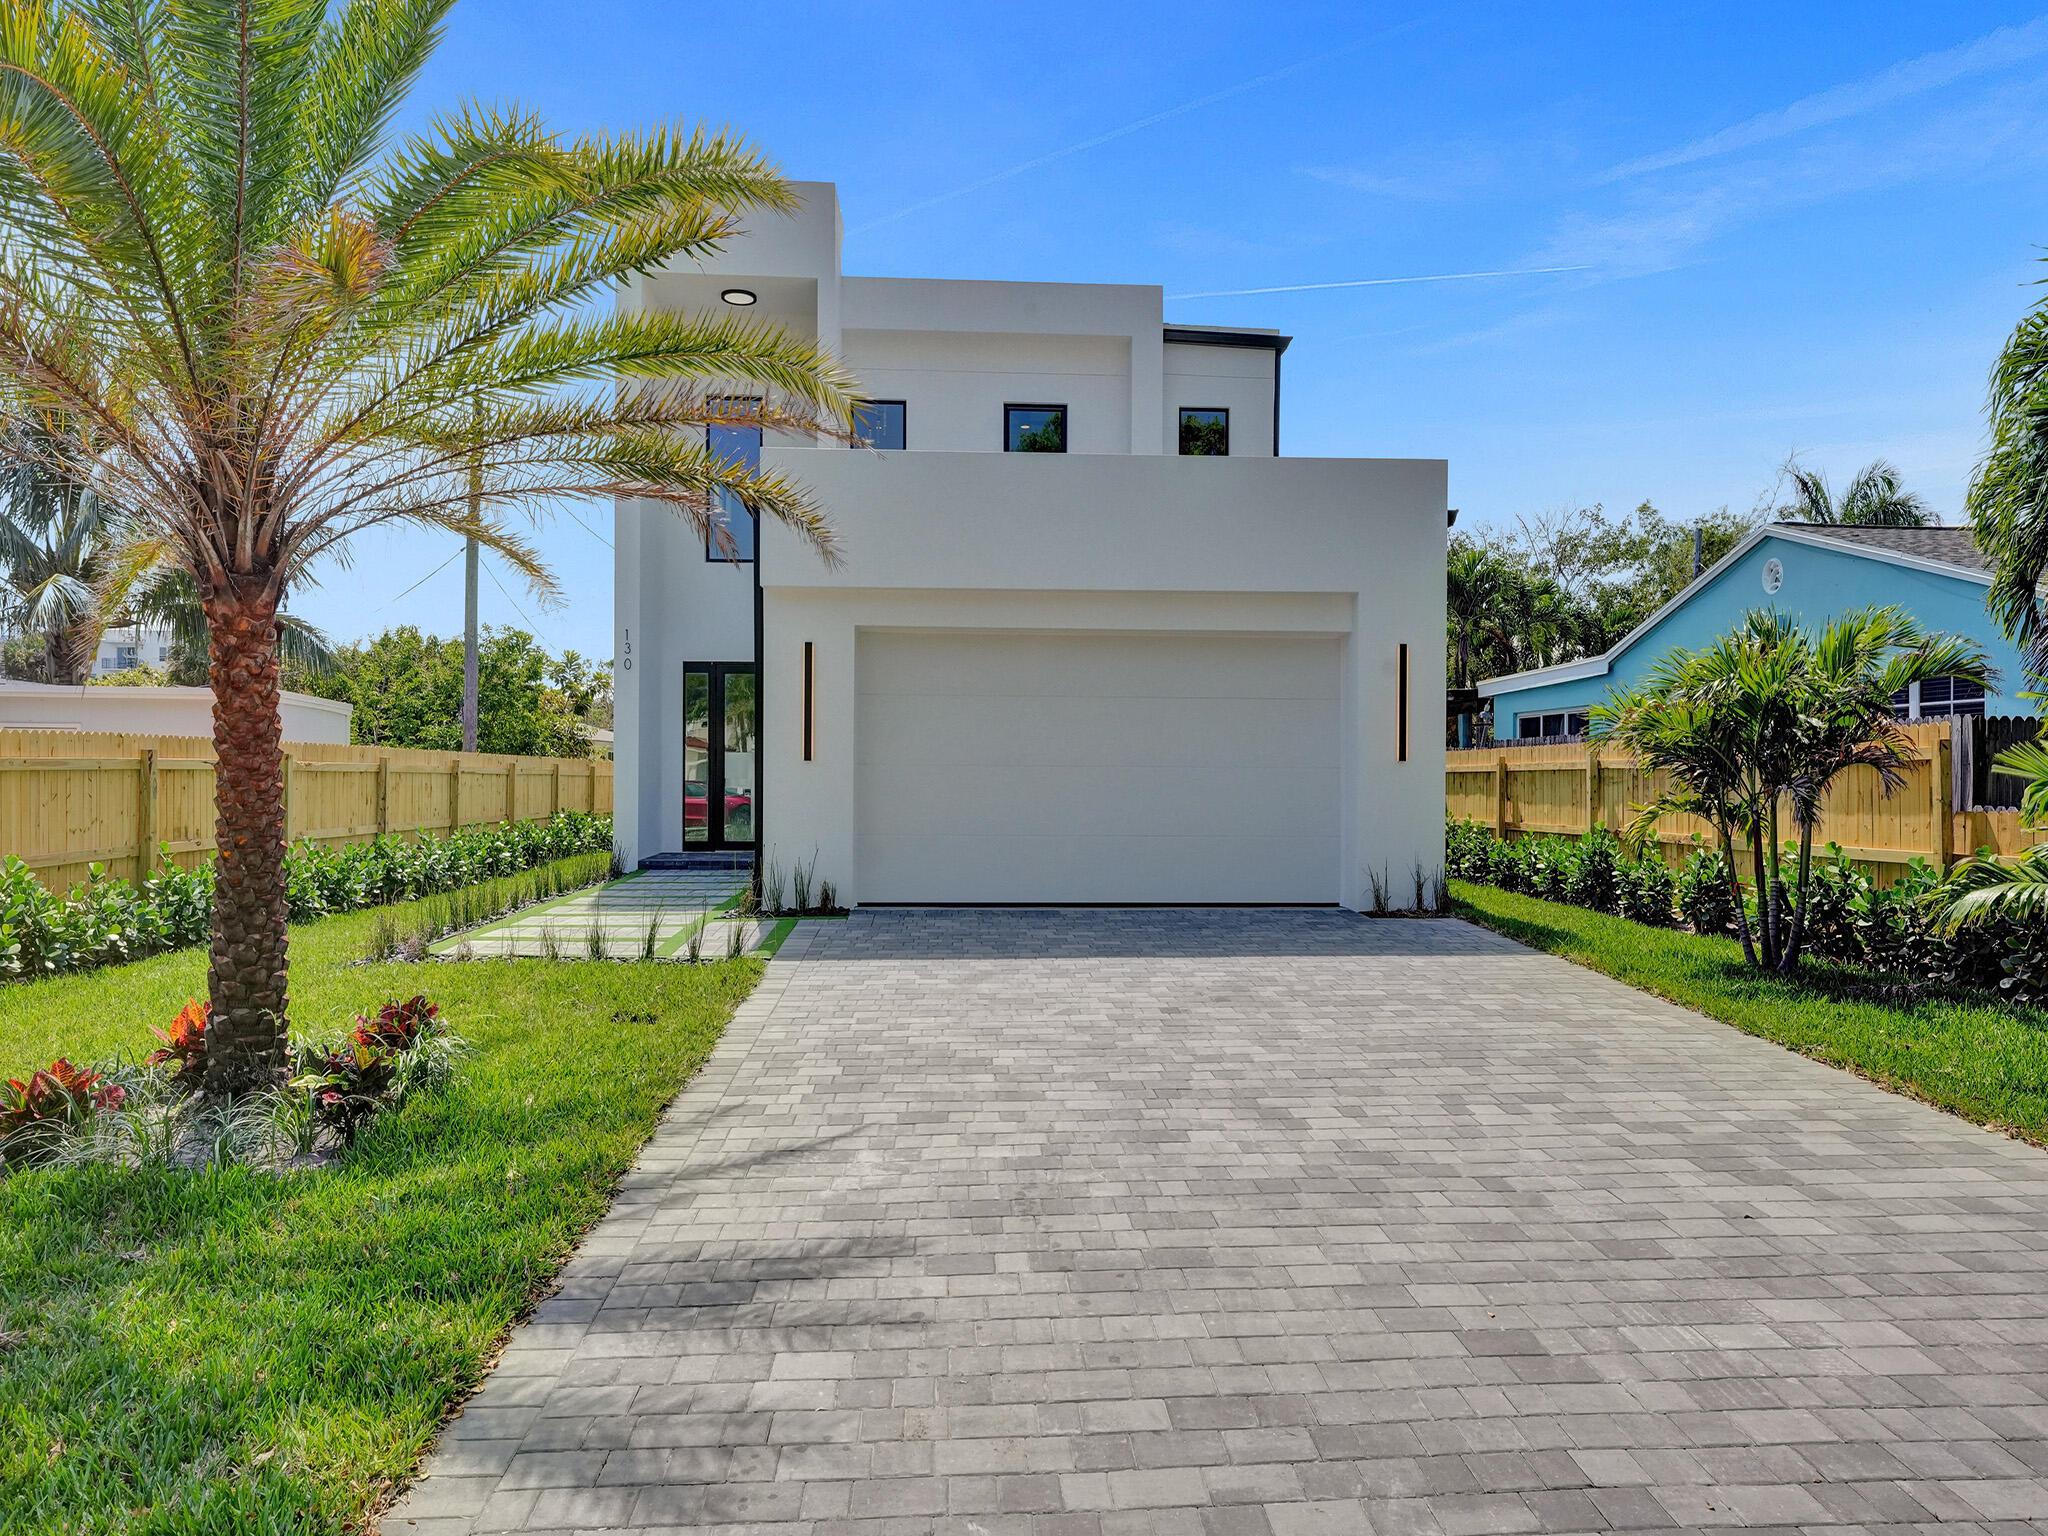 Welcome to your dream coastal retreat in the heart of East Lantana Beach! This stunning new construction home offers the ultimate blend of luxury, convenience, and seaside living. Located just steps away from pristine beaches, charming restaurants, serene nature preserves, and trendy shopping destinations, this two-story gem boasts four bedrooms, three bathrooms, a two-car garage, and a sparkling swimming pool. Step inside to discover a spacious and bright interior featuring modern finishes, high ceilings, and ample natural light throughout. The open-concept living area seamlessly flows into the gourmet kitchen, complete with stainless steel appliances, sleek countertops, and a large island perfect for entertaining guests or enjoying casual meals with family. Buy New without the worry!